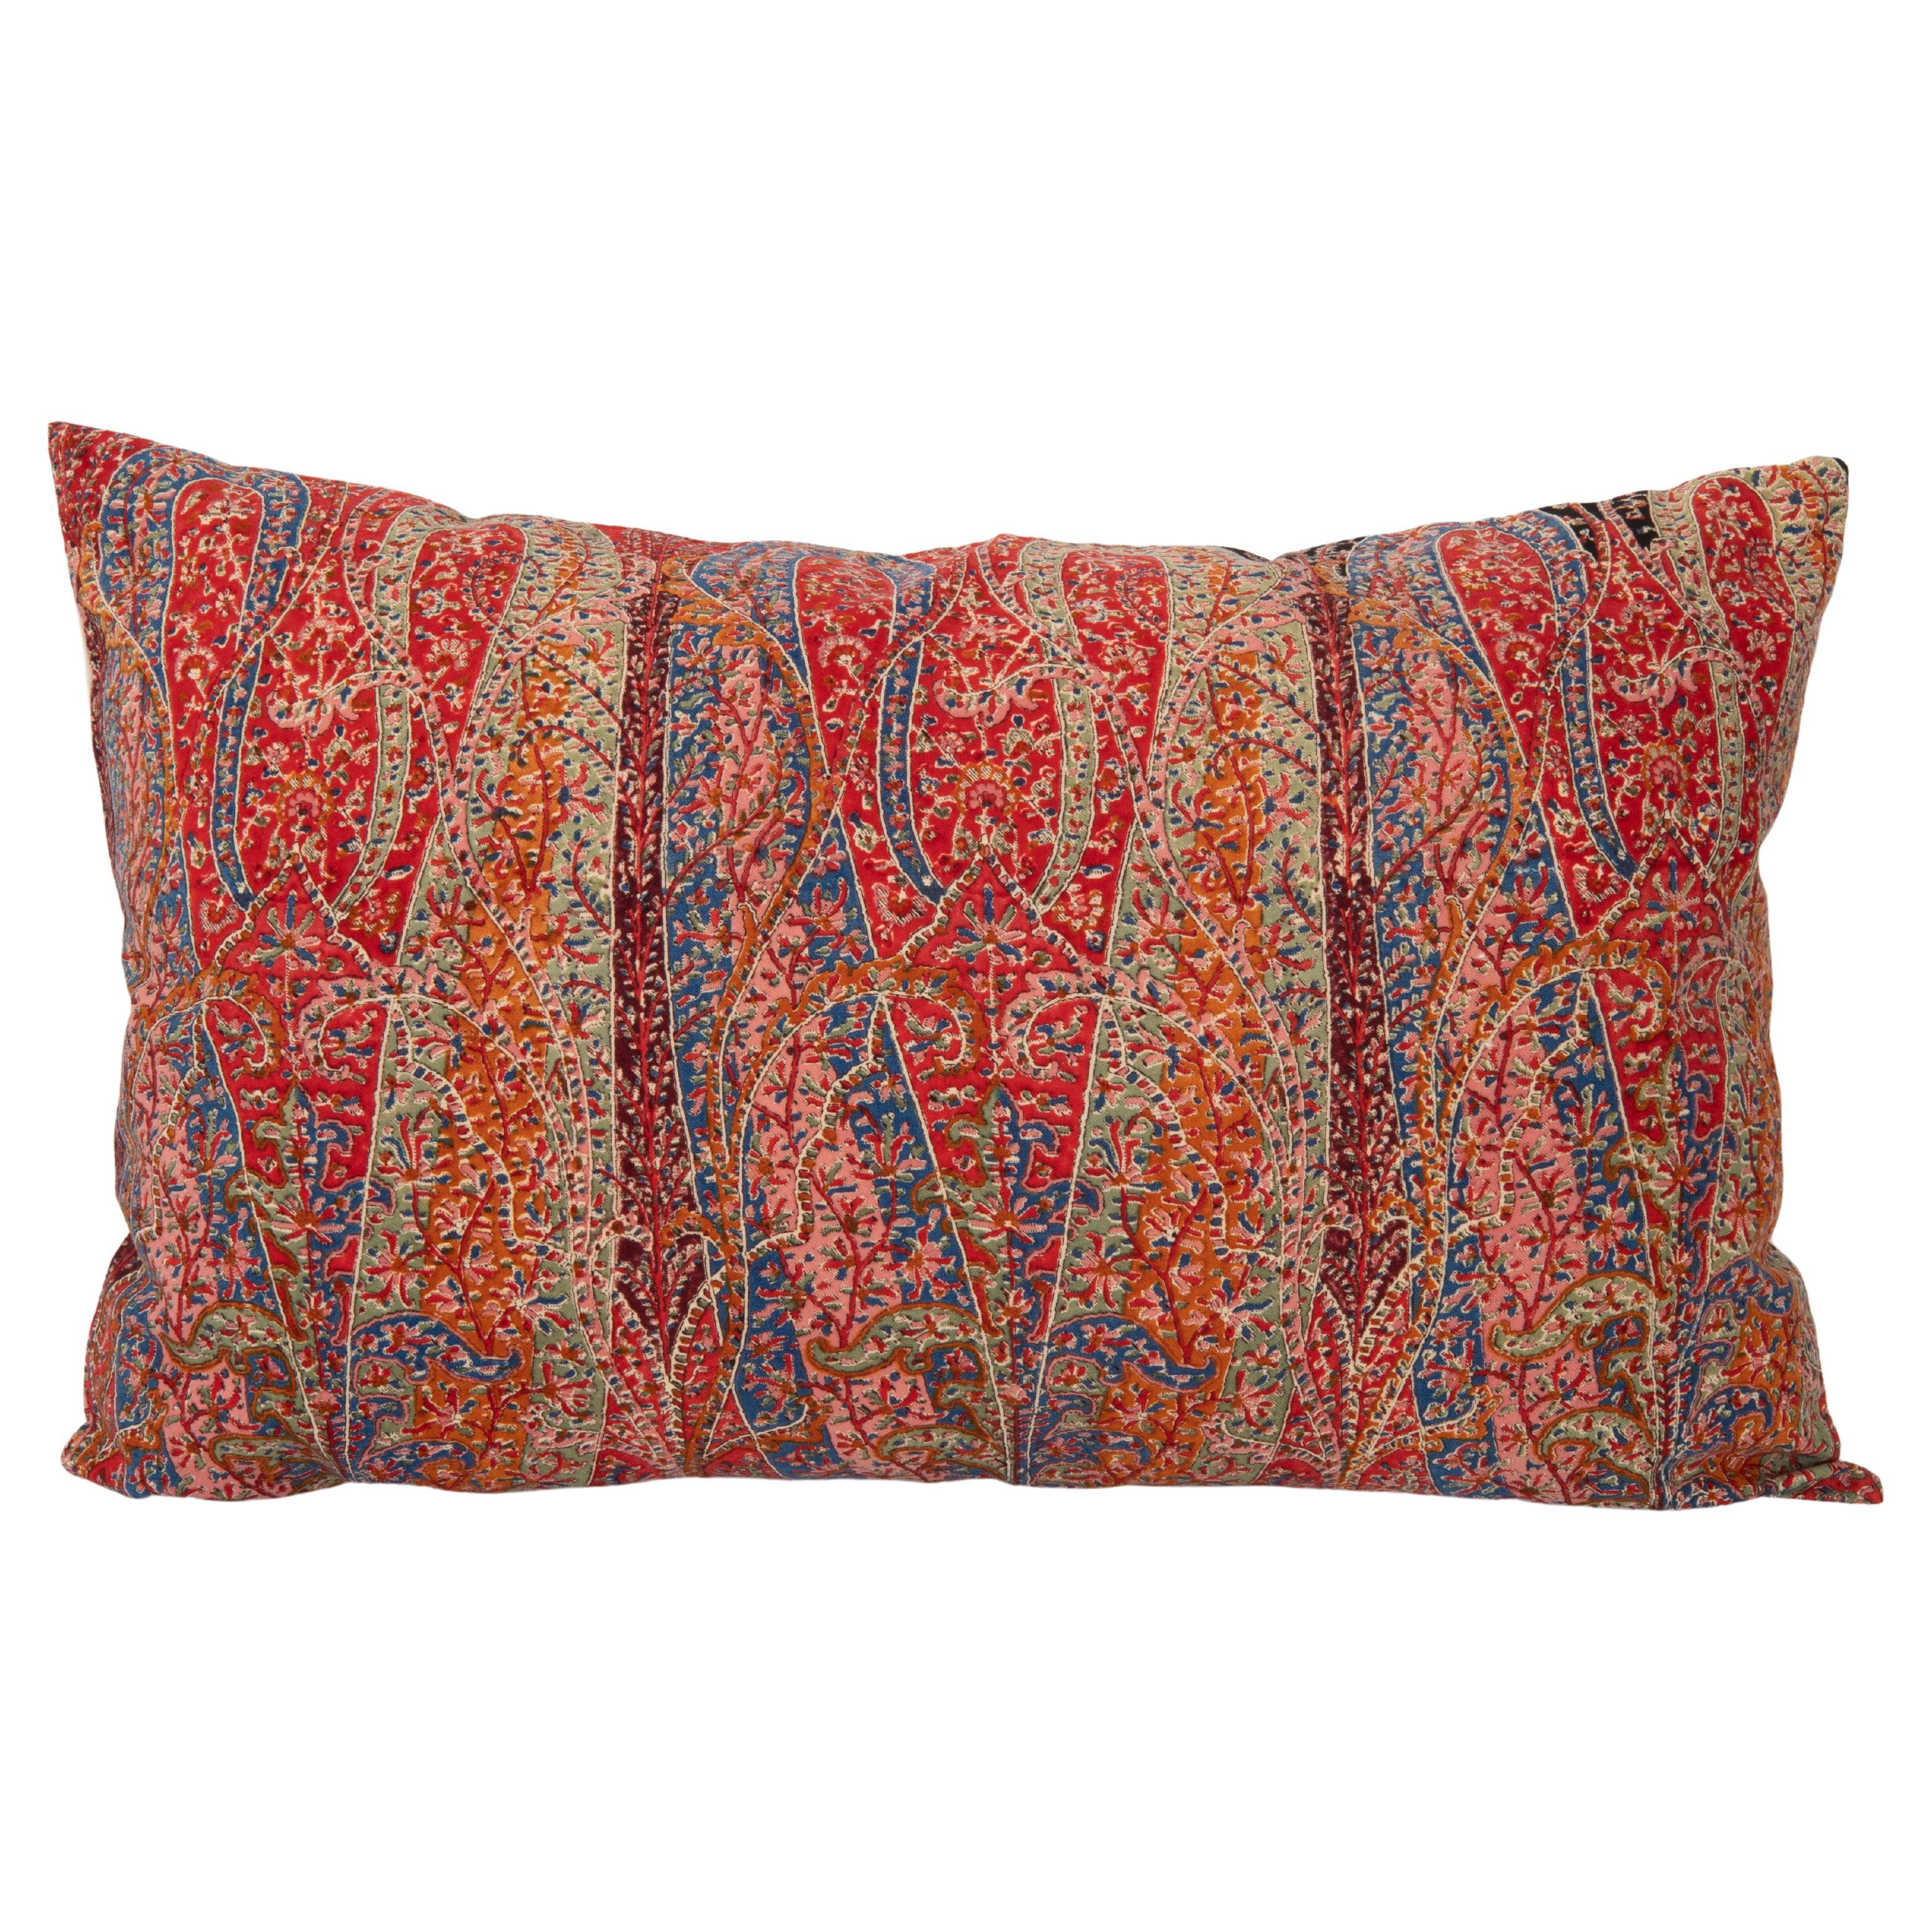 Pillow Cover Made from a an Antique Printed Scottish Paisley Shawl    For Sale